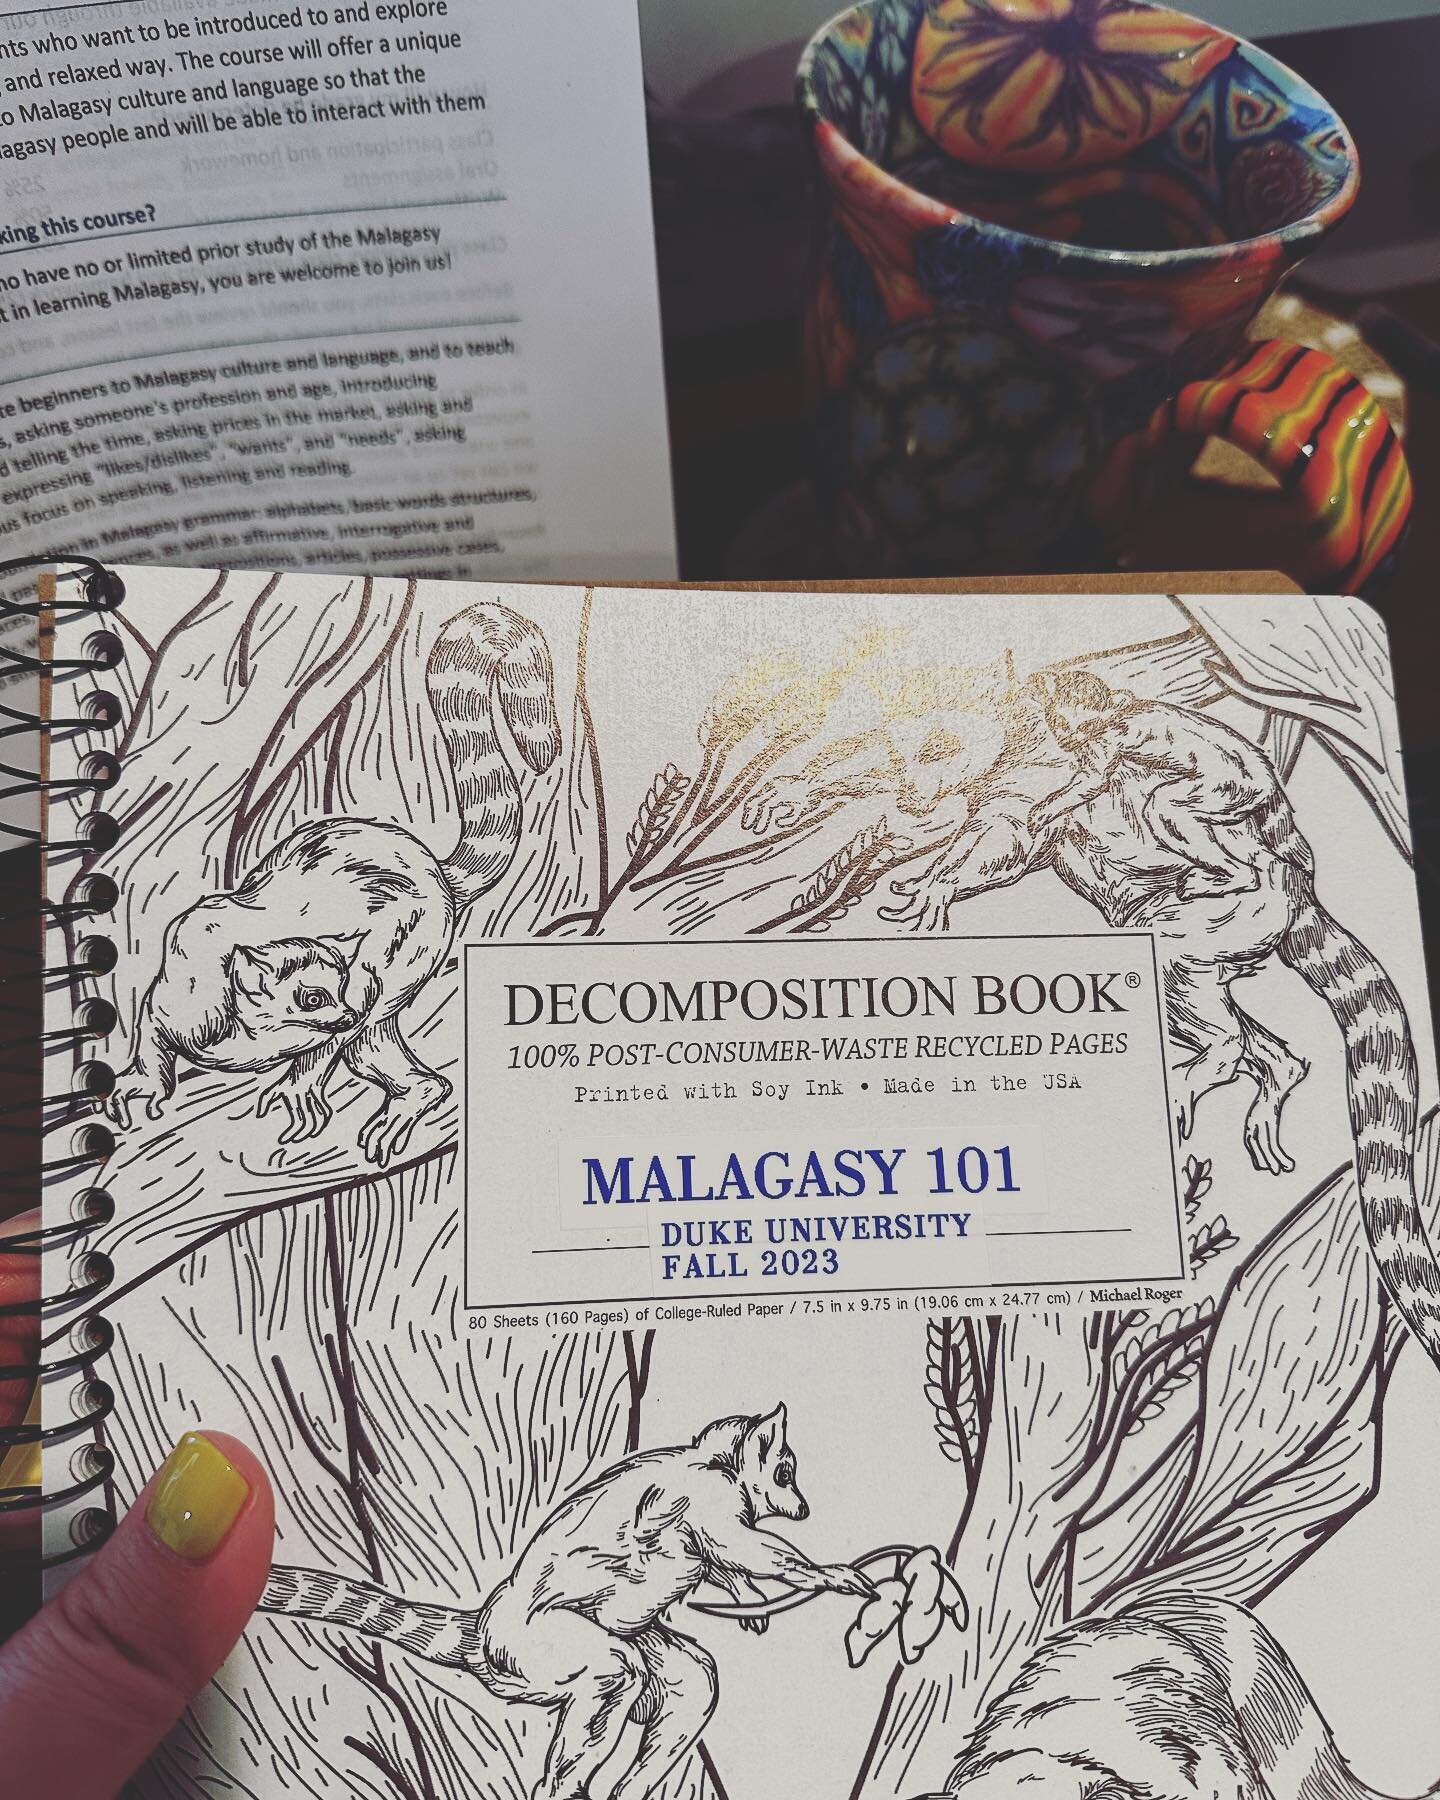 🎓📚 Taking on a new challenge as a student once again by auditing the Malagasy 101 class at Duke University! 🇲🇬 Being on the other side of the desk, absorbing knowledge and expanding my horizons, is an exciting experience! 🌱💫

Malagasy 101 offer